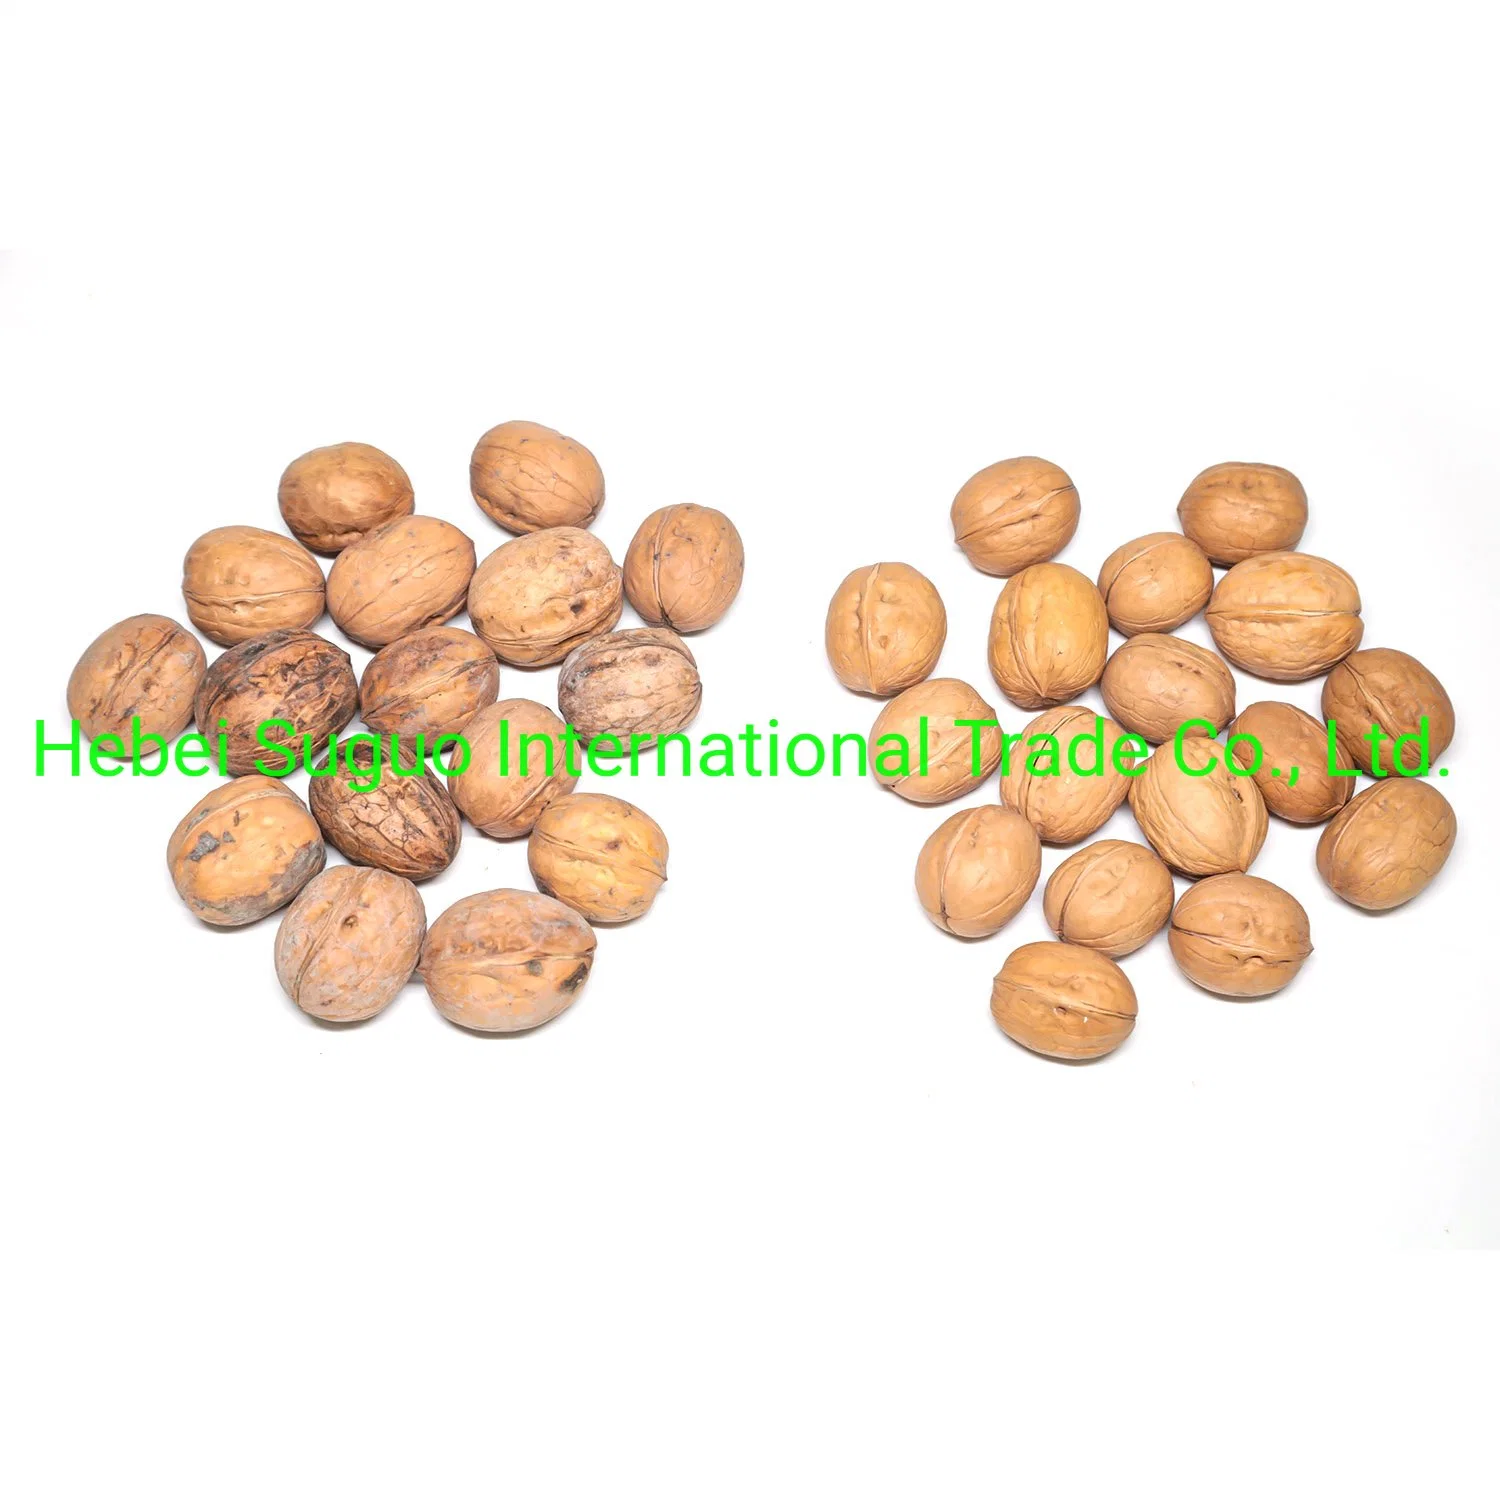 Chinese 185 33 Xiner Xinfeng Walnut and Walnut Kernels